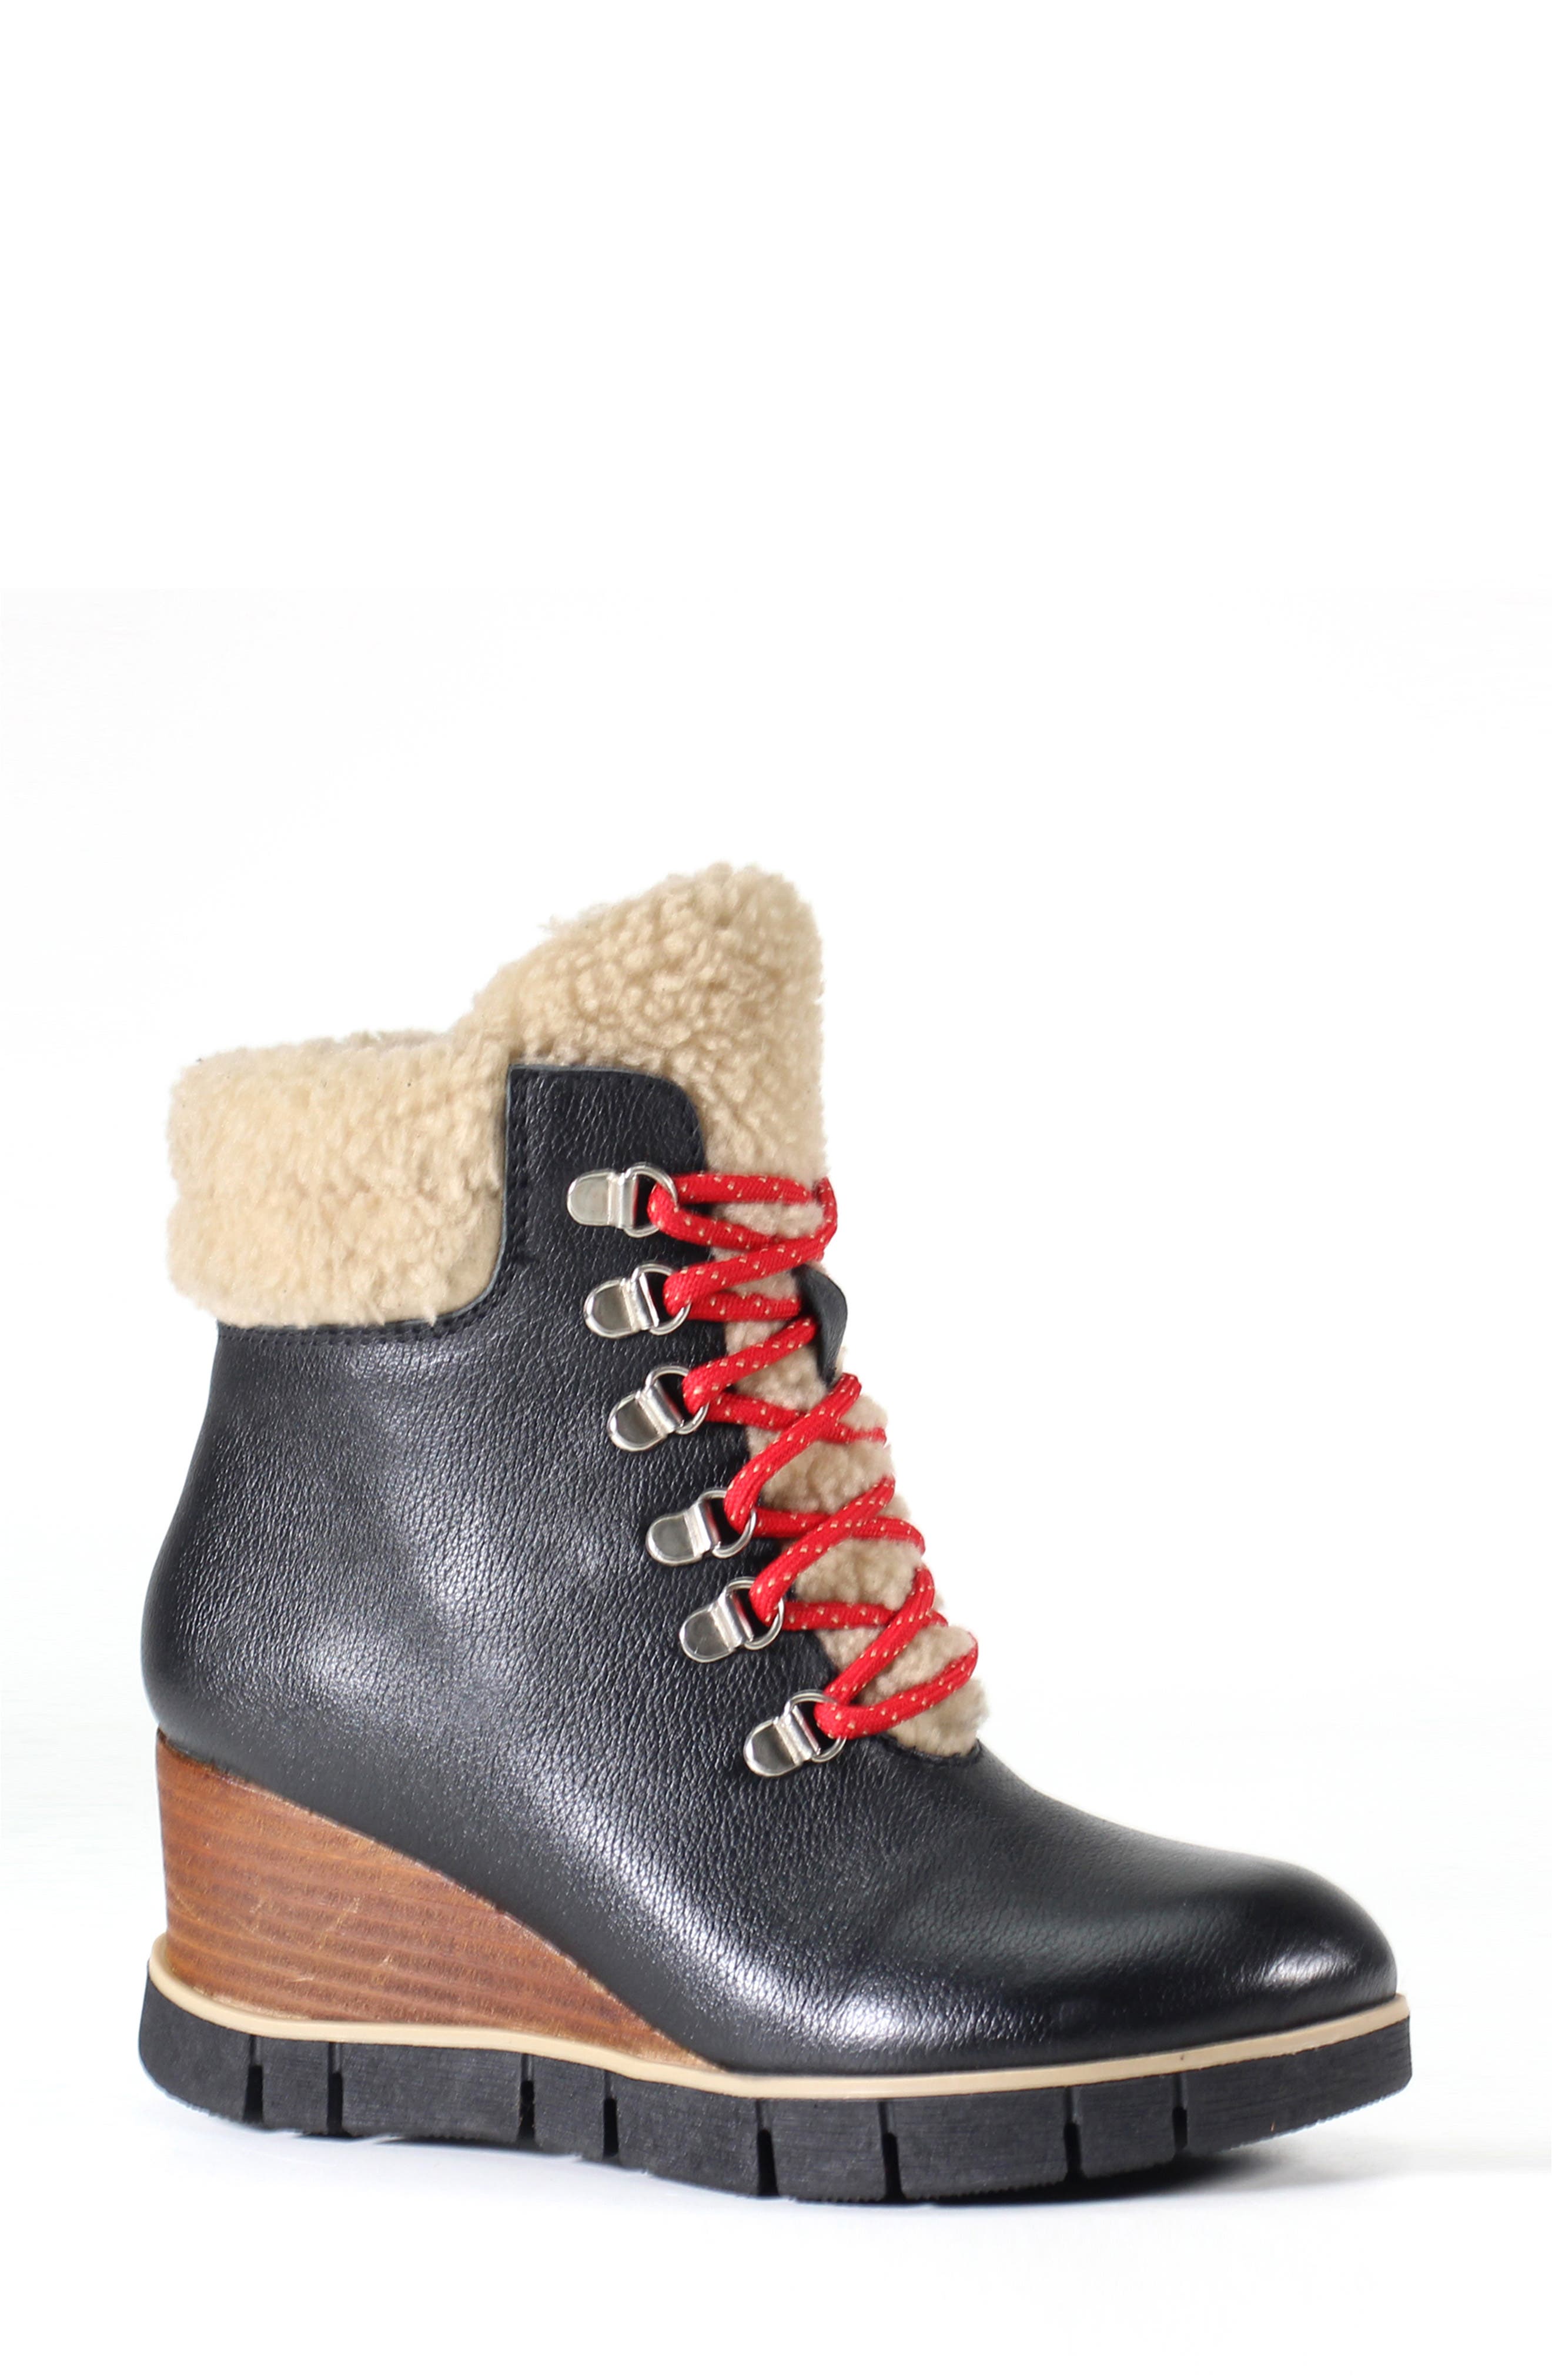 Diba True Busy Bun Faux Shearling Wedge Bootie in Black at Nordstrom